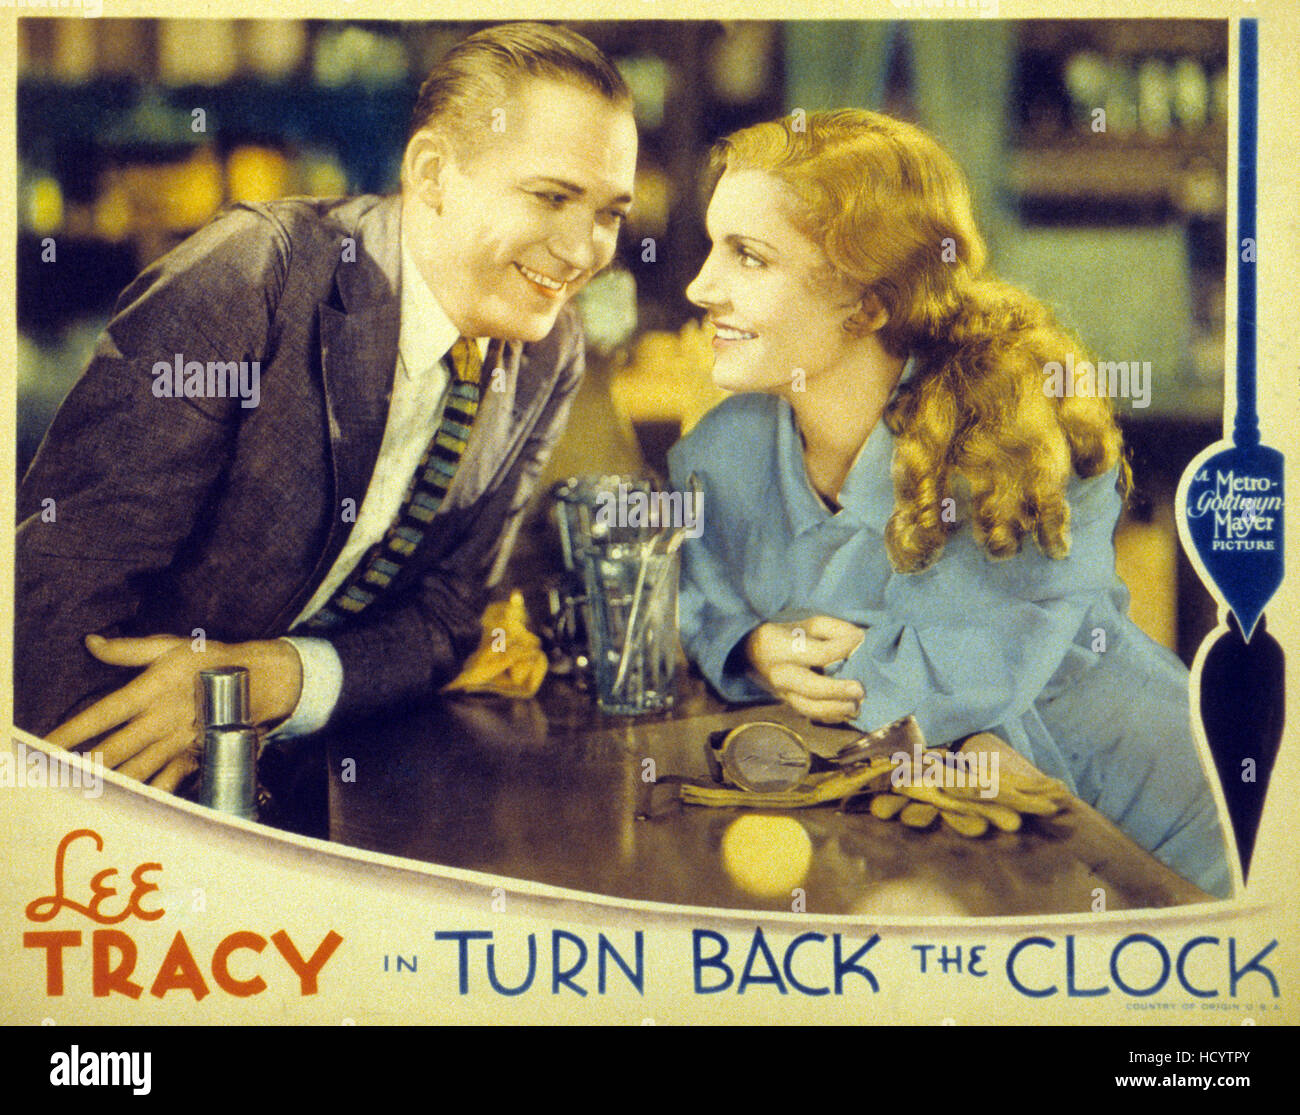 TURN BACK THE CLOCK, Lee Tracy, Peggy Shannon, 1933 Stock Photo